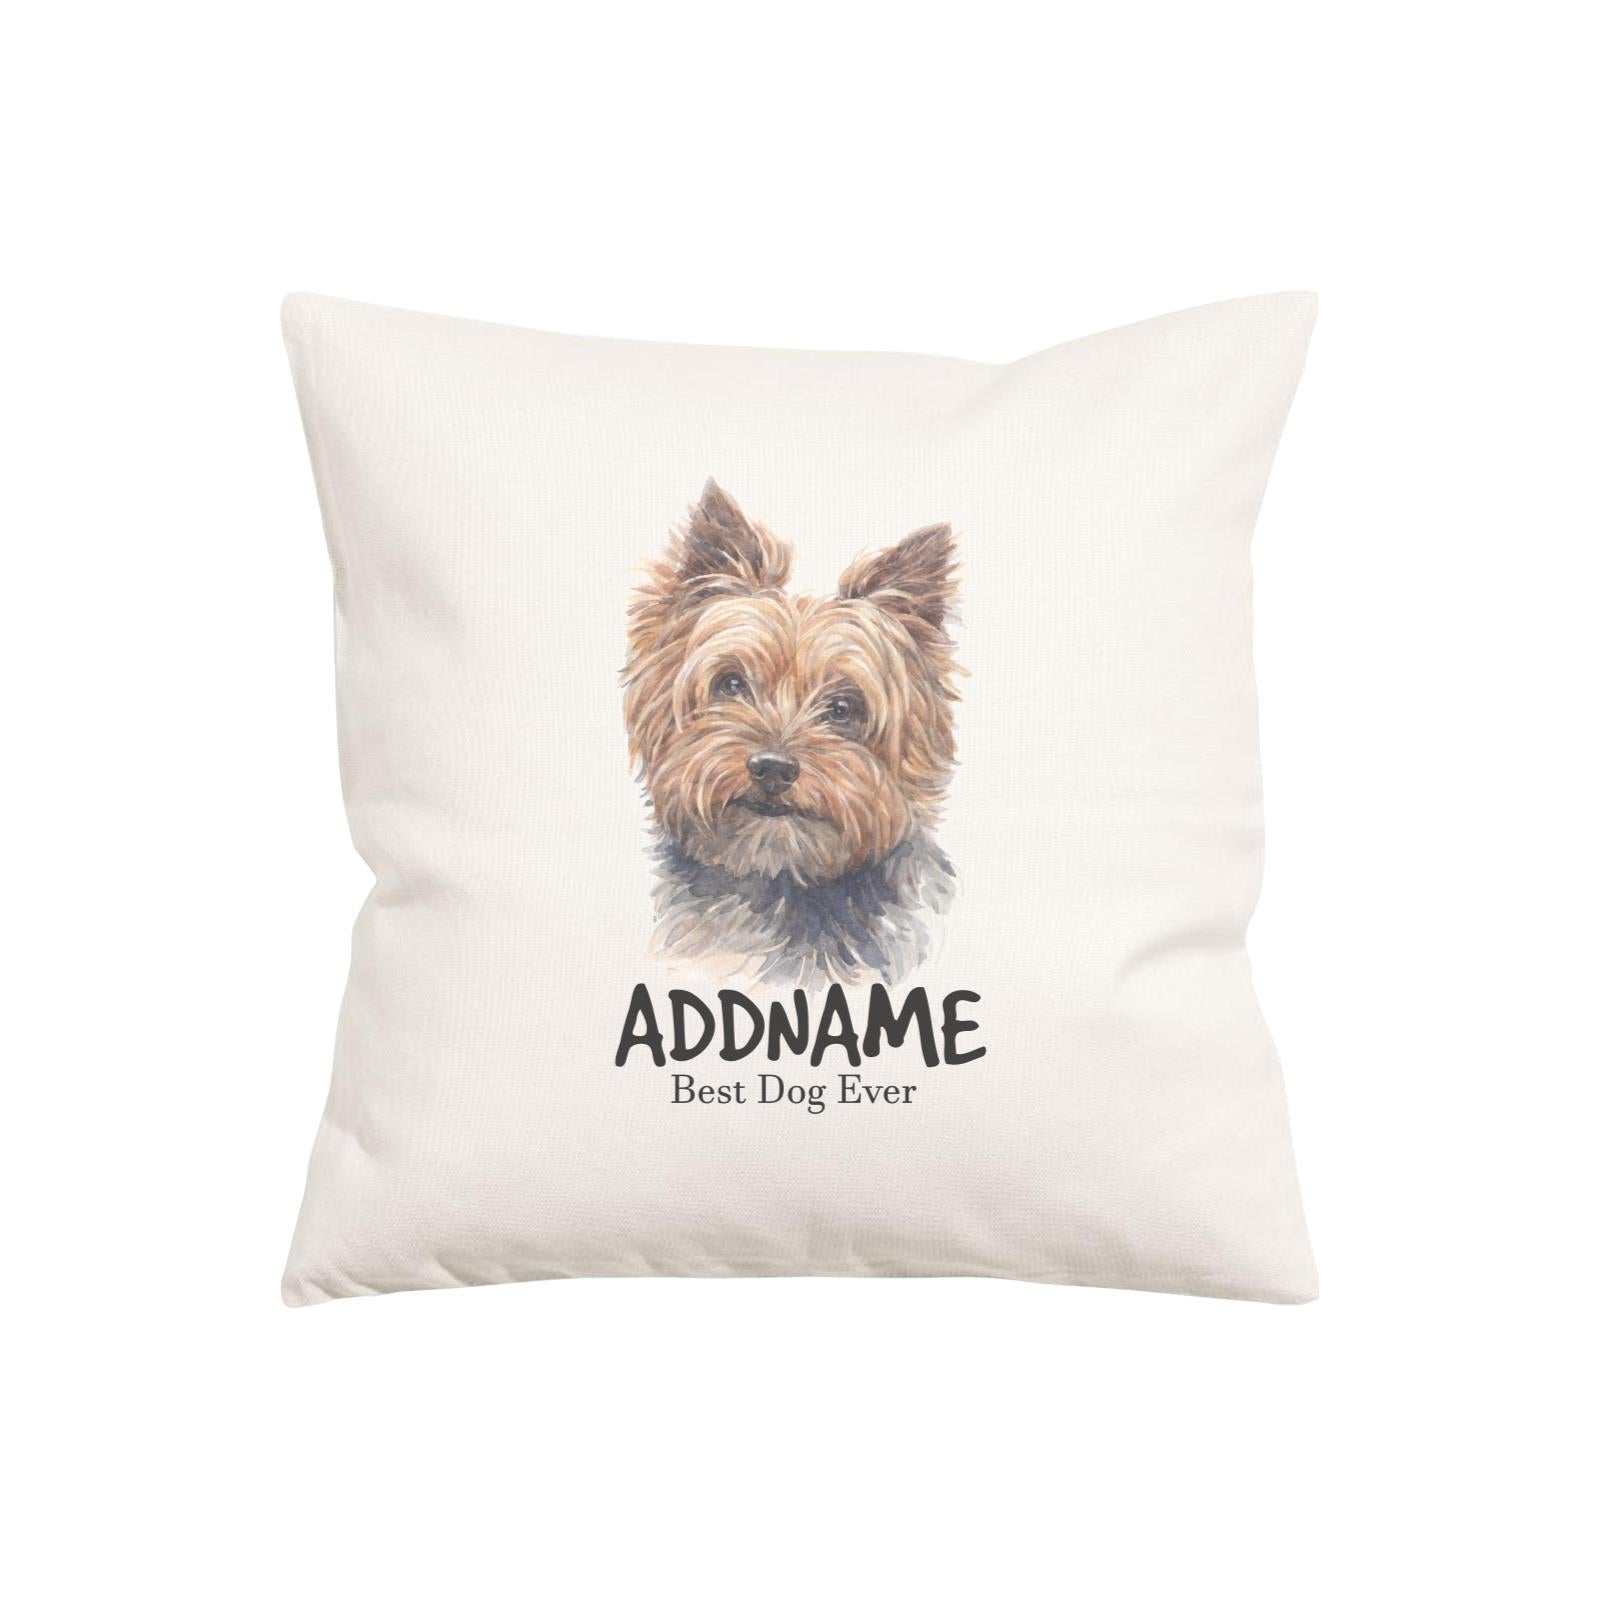 Watercolor Dog Series Yorkshire Small Best Dog Ever Addname Pillow Cushion